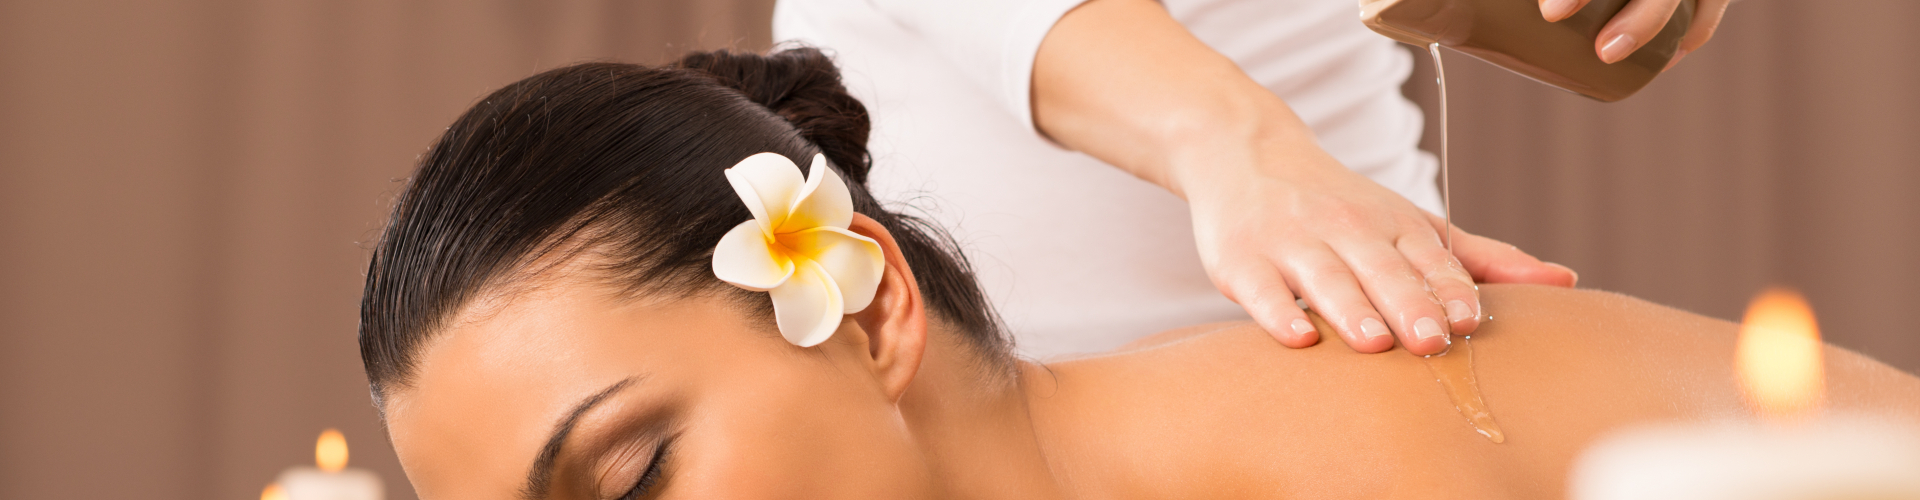 online relaxation massage course